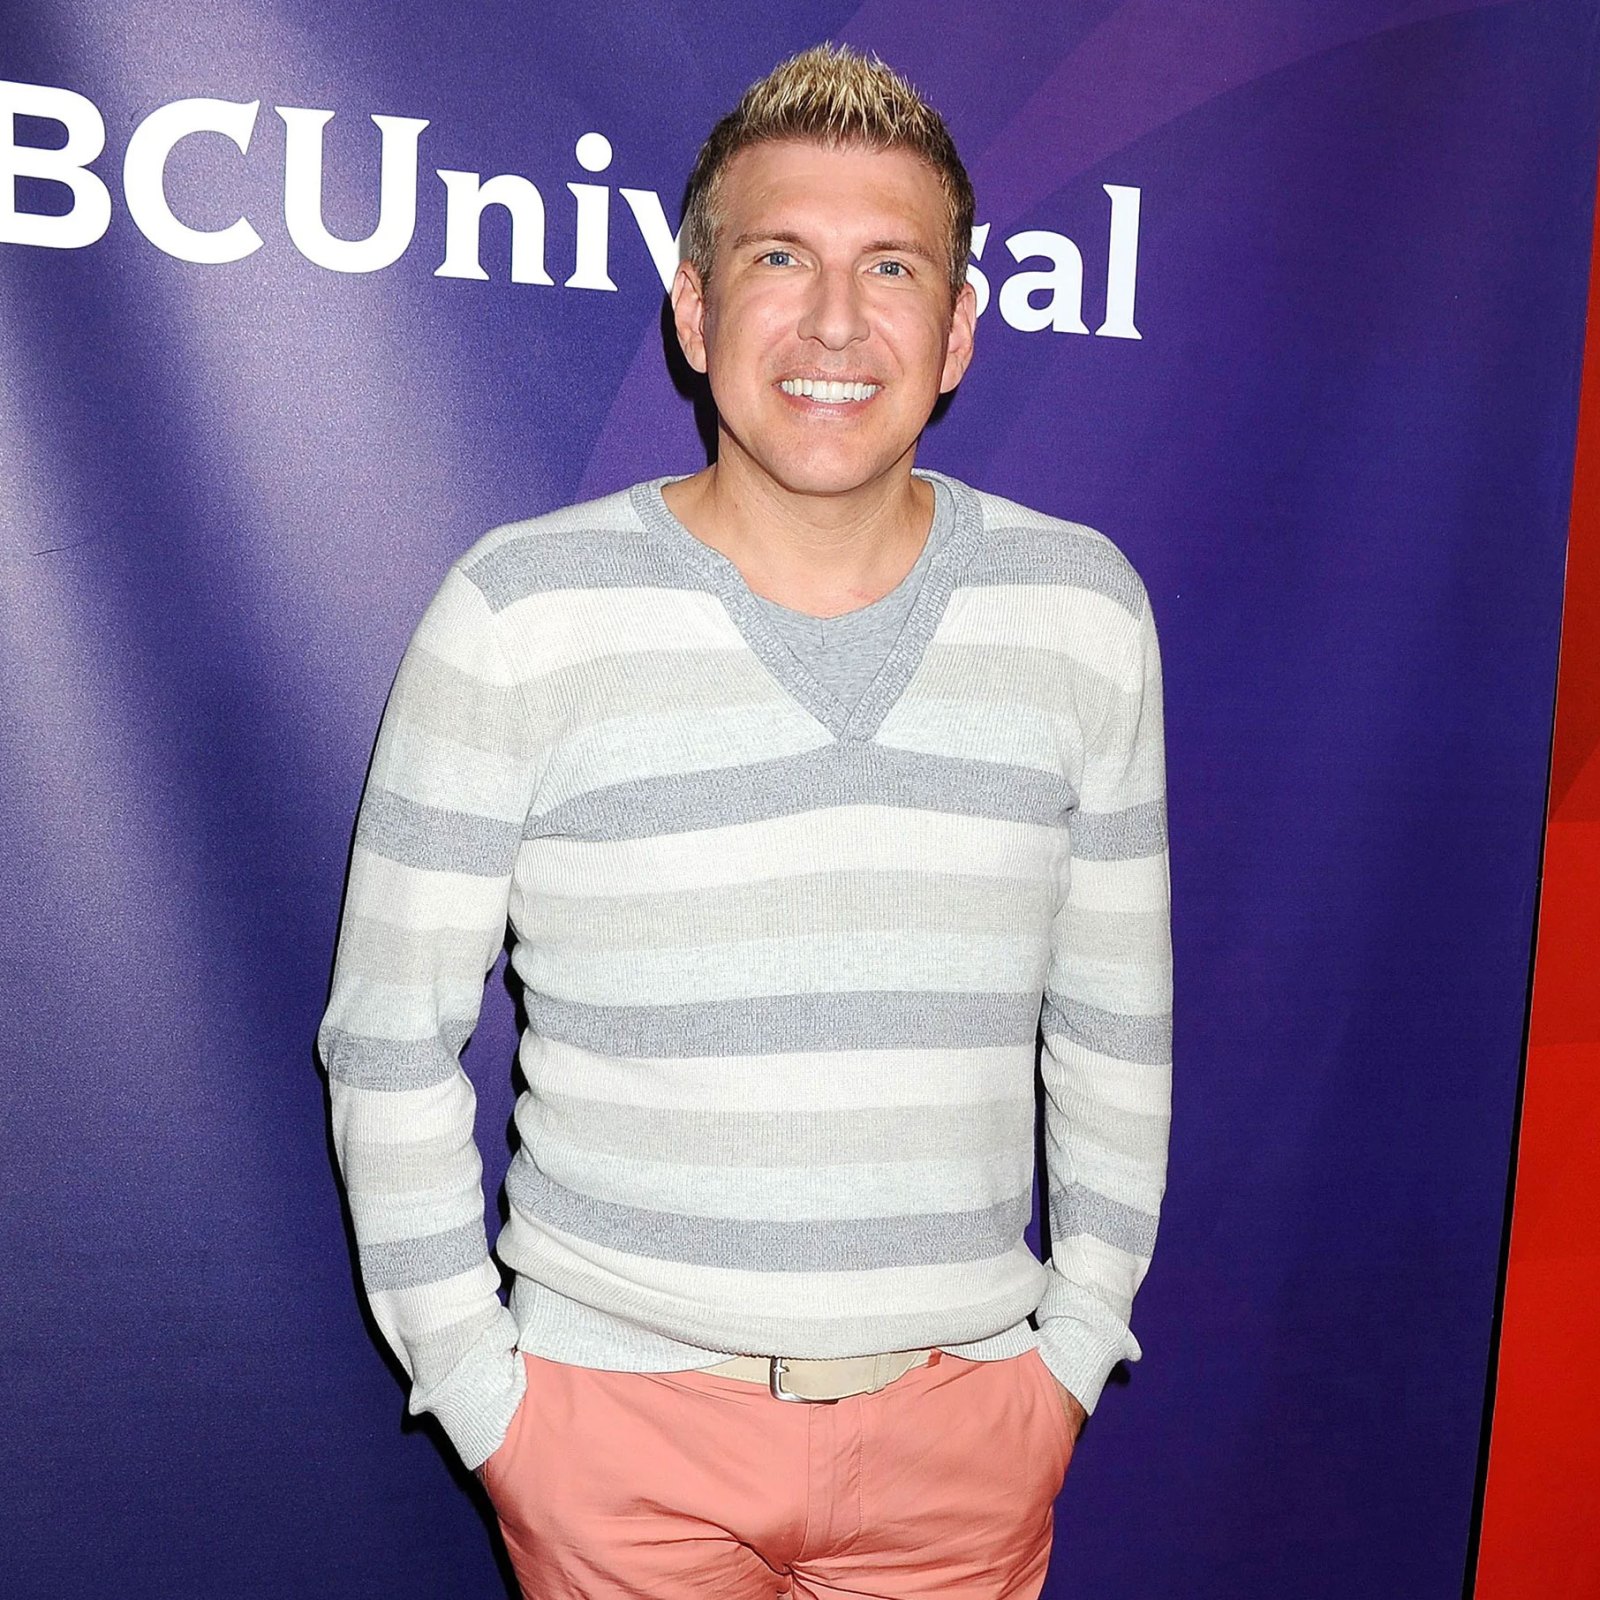 Todd Chrisley Admits His Self Worth Was Linked to Net Worth Before Fraud Scandal